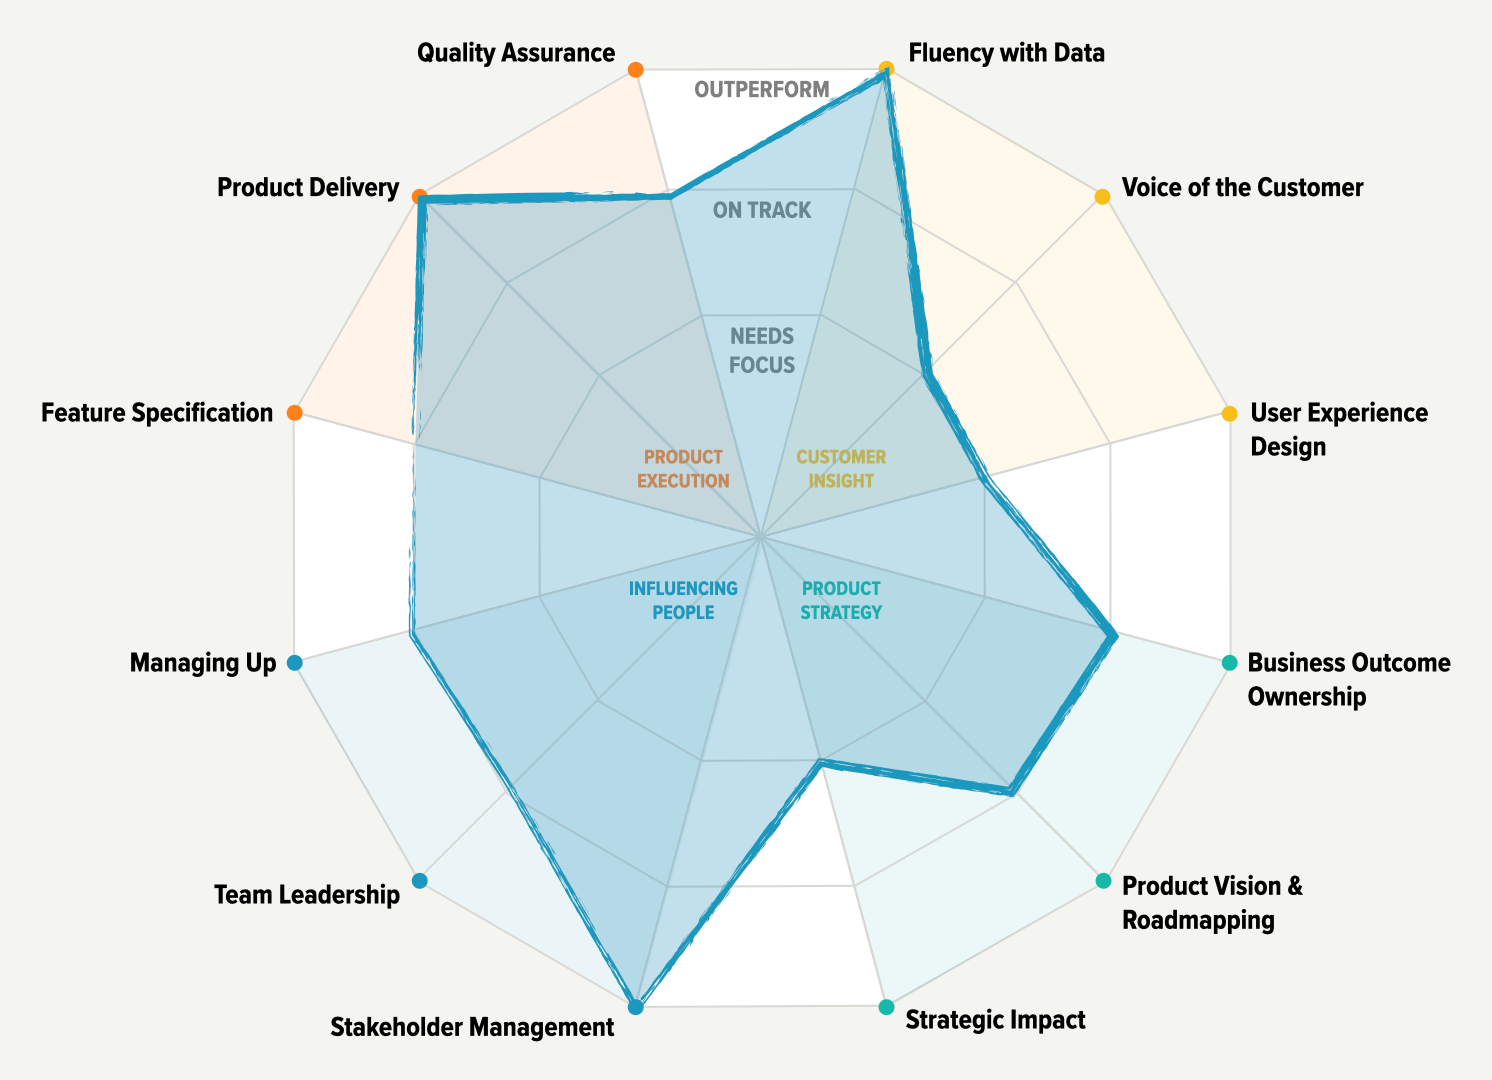 What’s Your Shape? A Product Manager’s Guide to Growing Yourself and Your Team